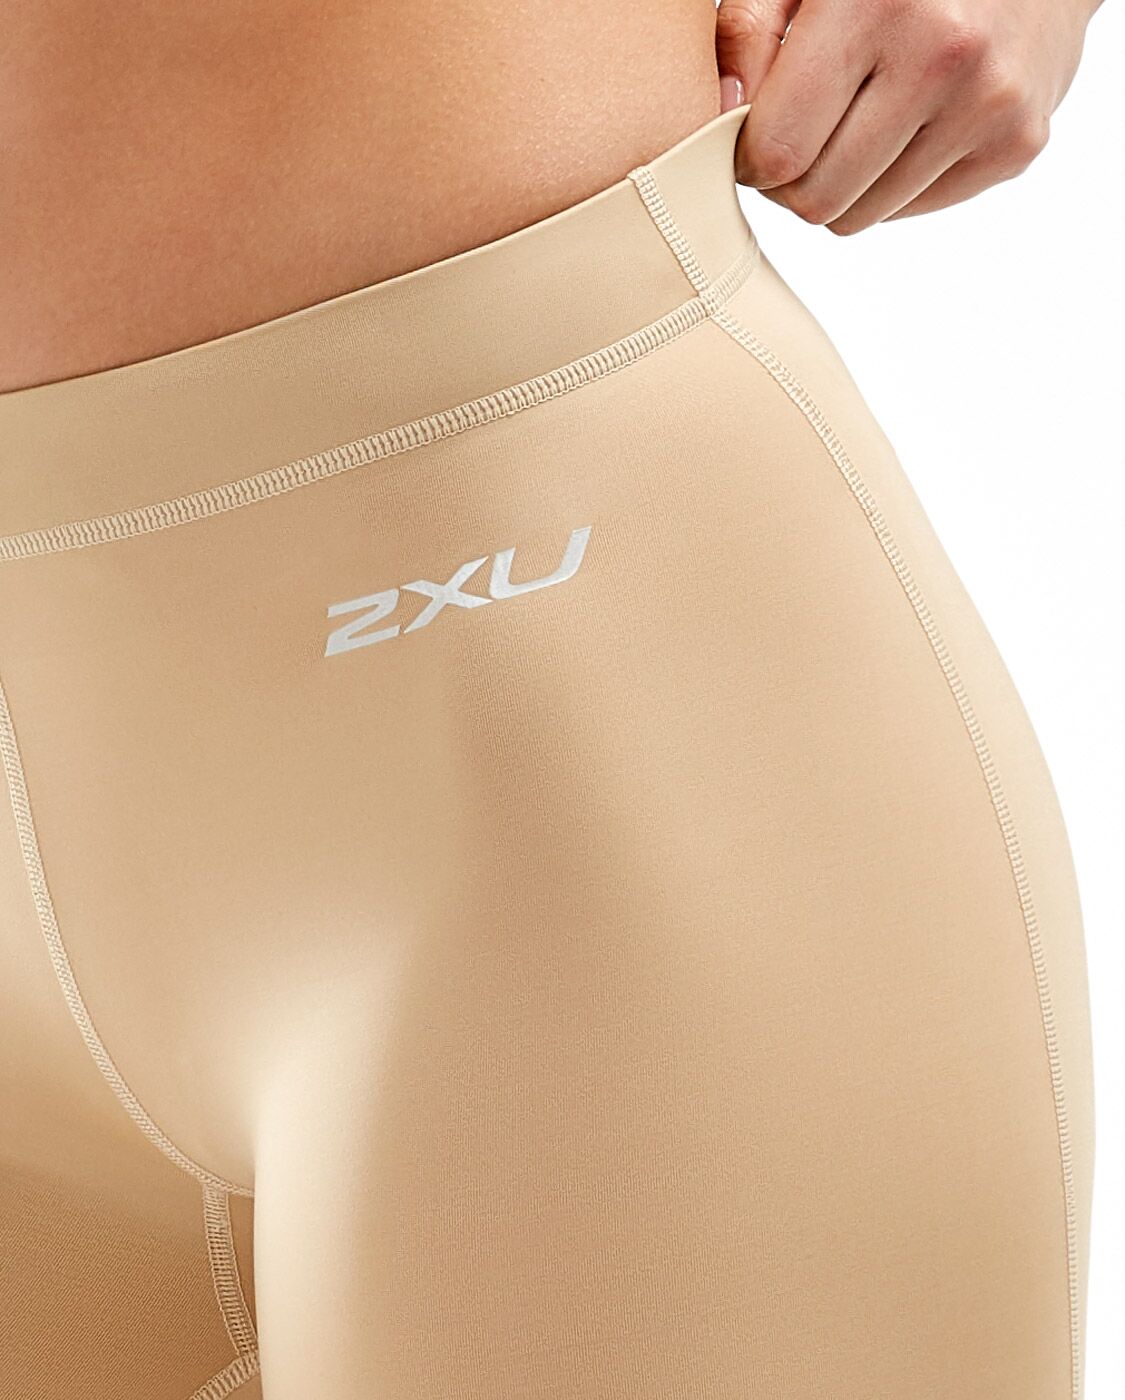 2XU South Africa - Womens Core Compression 5 Inch Game Day Shorts - Black/Silver